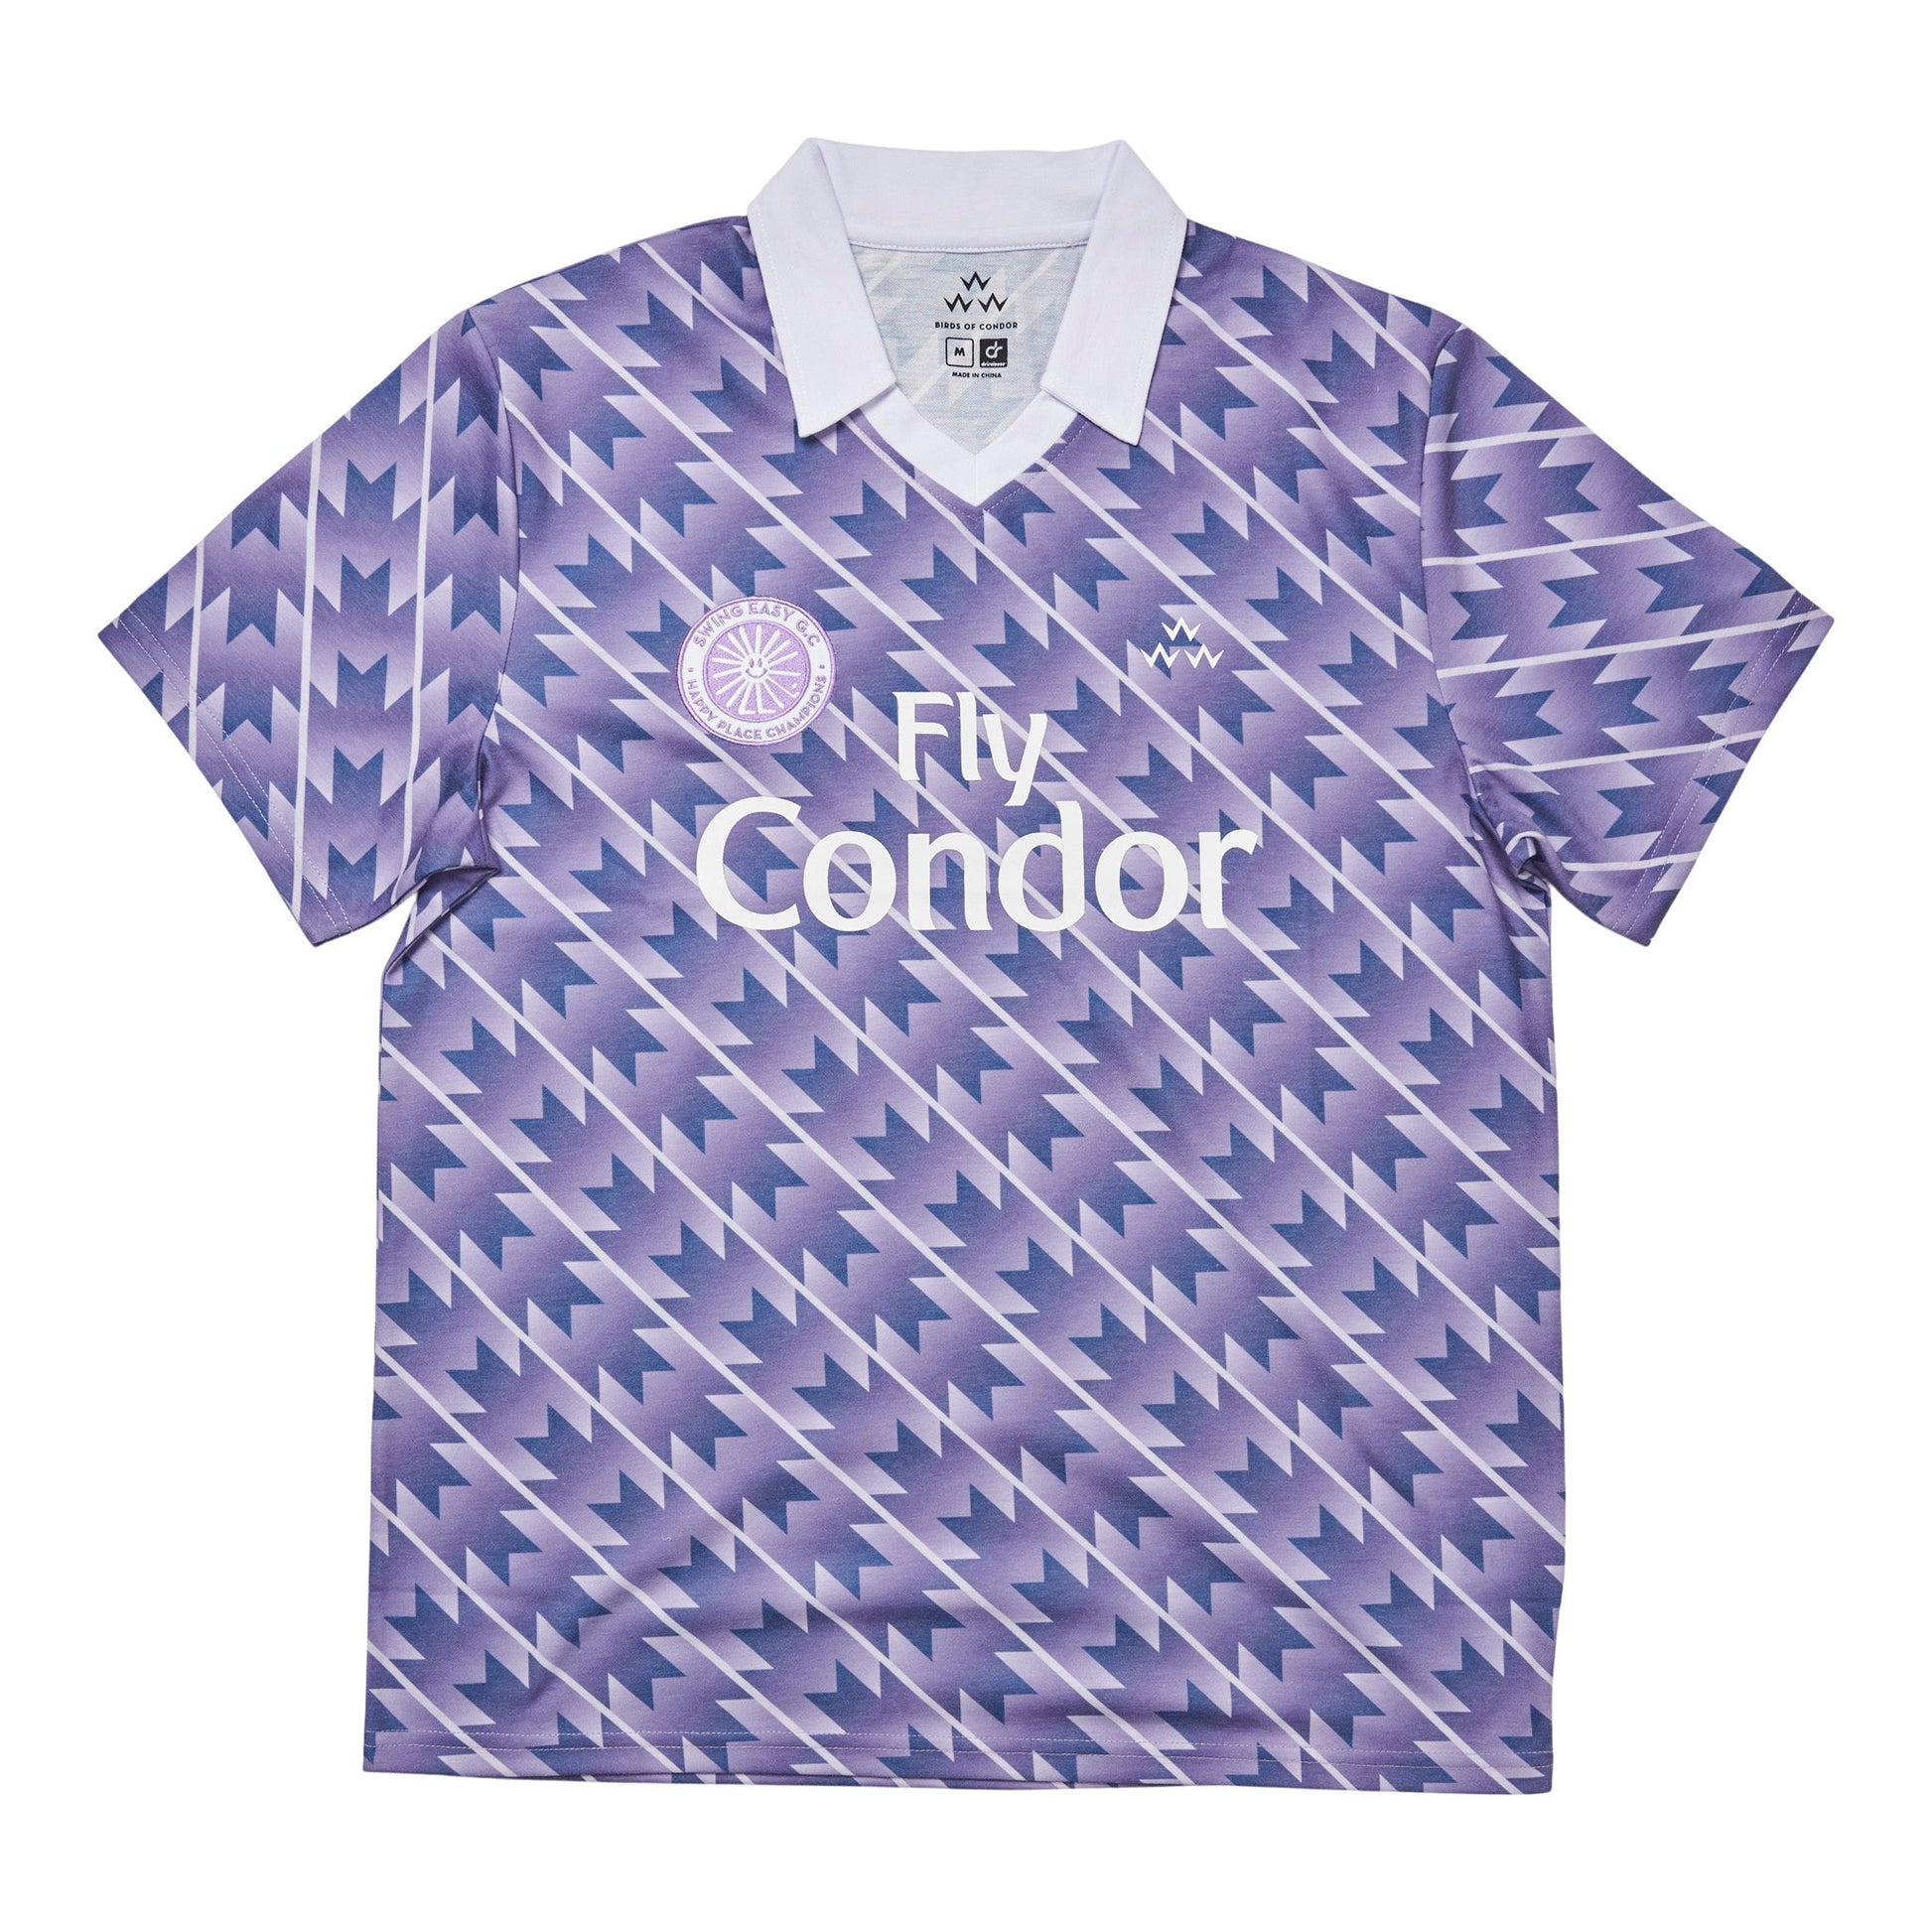 birds-of-condor-purple-white-swing-easy-golf-club-happy-place-champions-fifa-world-cup-football-fly-condor-golf-polo-shirt-front